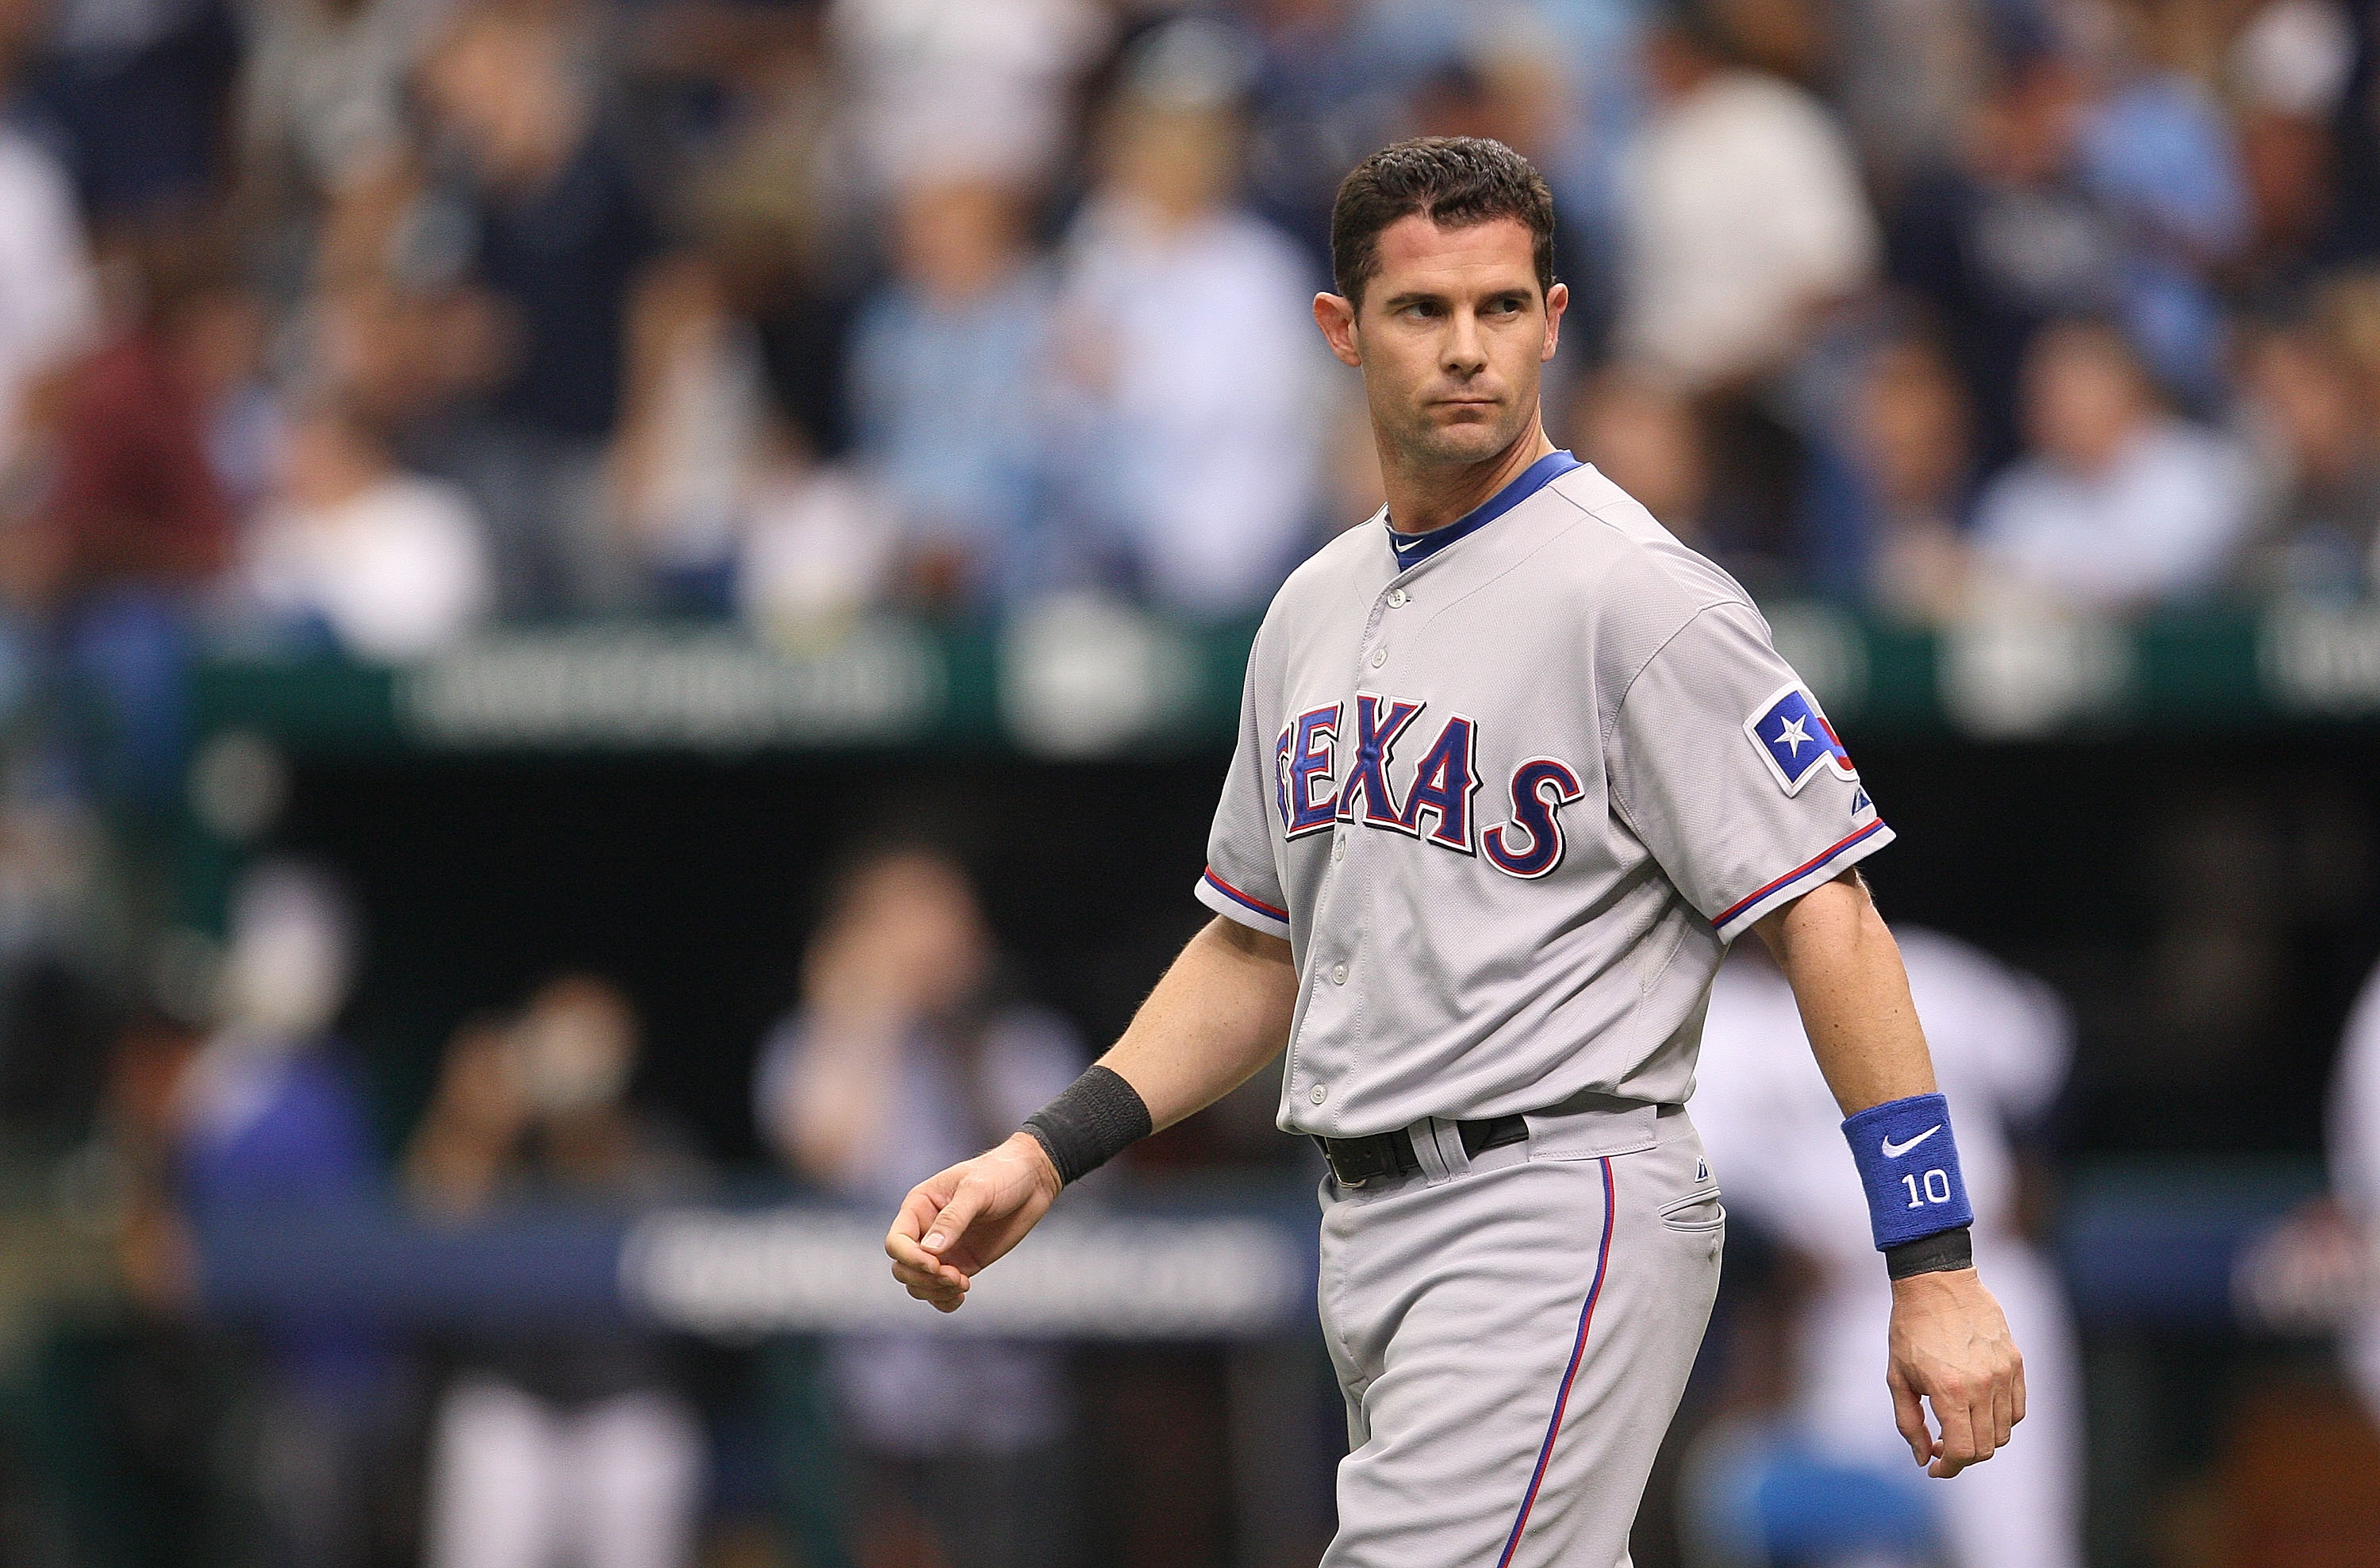 Texas Rangers' all-time hit leader Michael Young retires from baseball